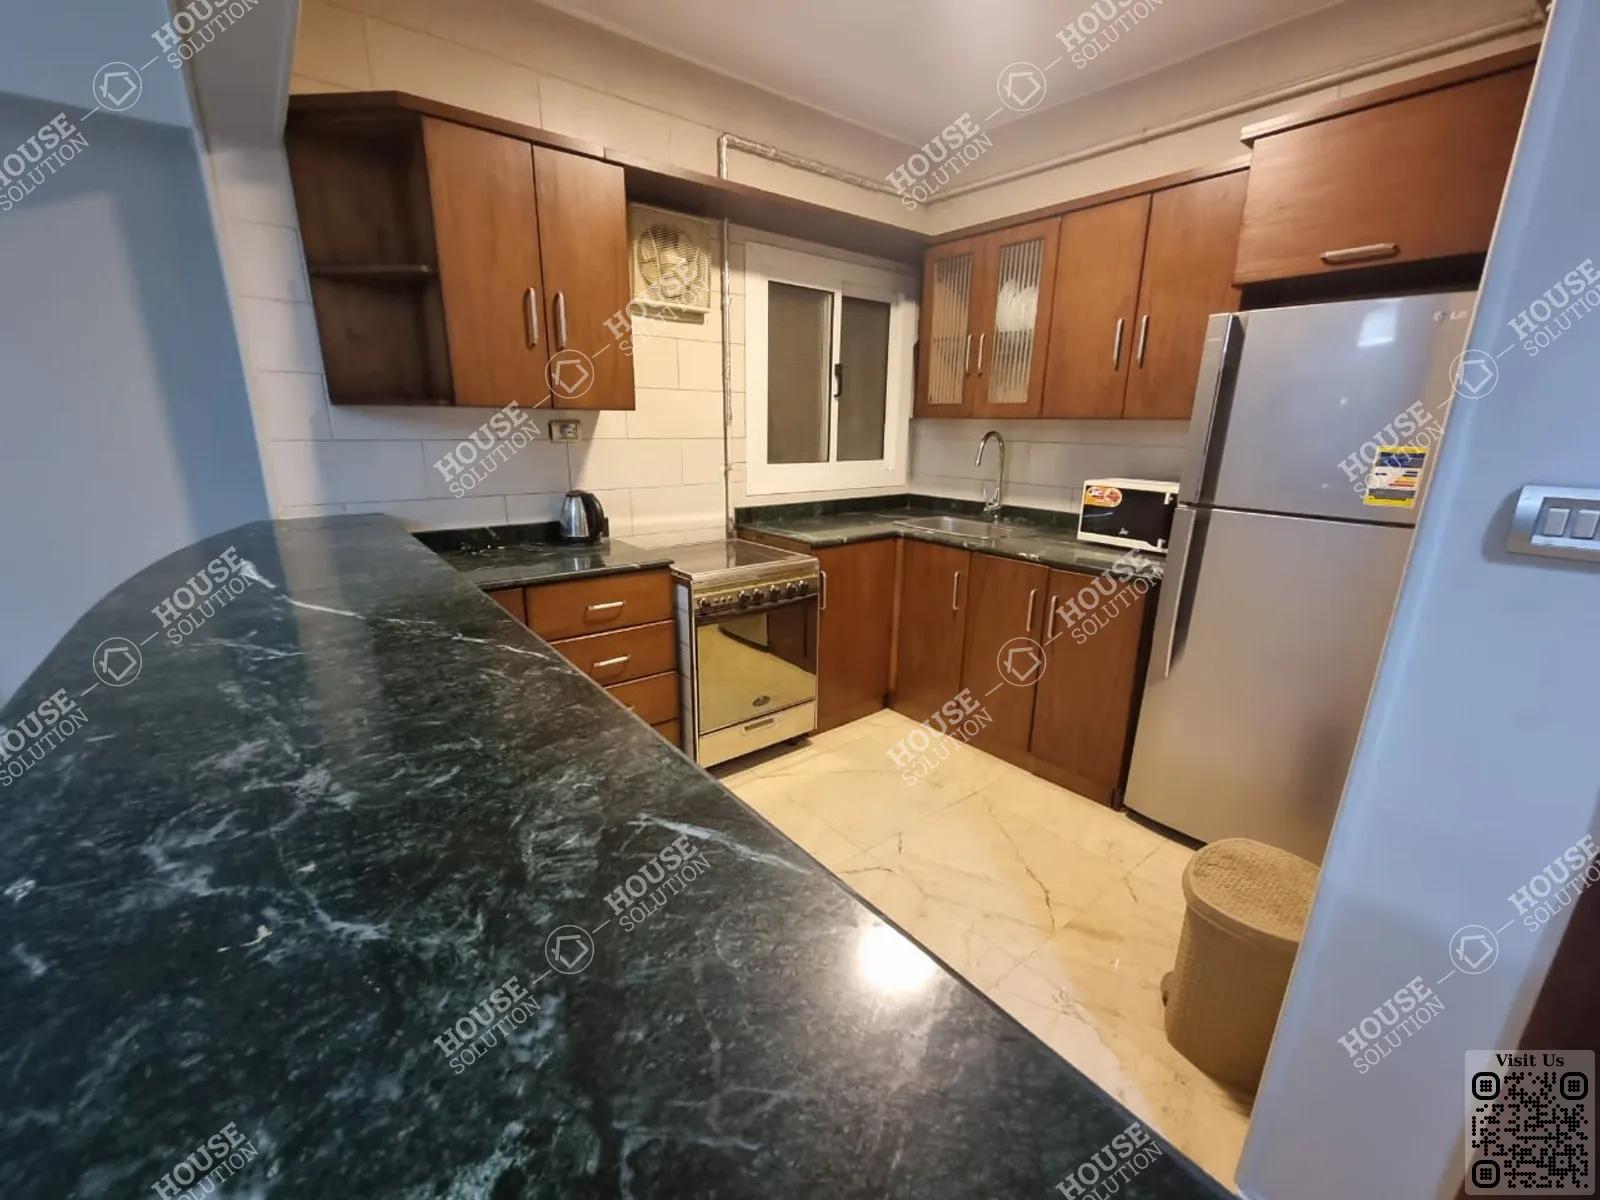 KITCHEN  @ Apartments For Rent In Maadi Maadi Degla Area: 110 m² consists of 2 Bedrooms 2 Bathrooms Modern furnished 5 stars #4346-2